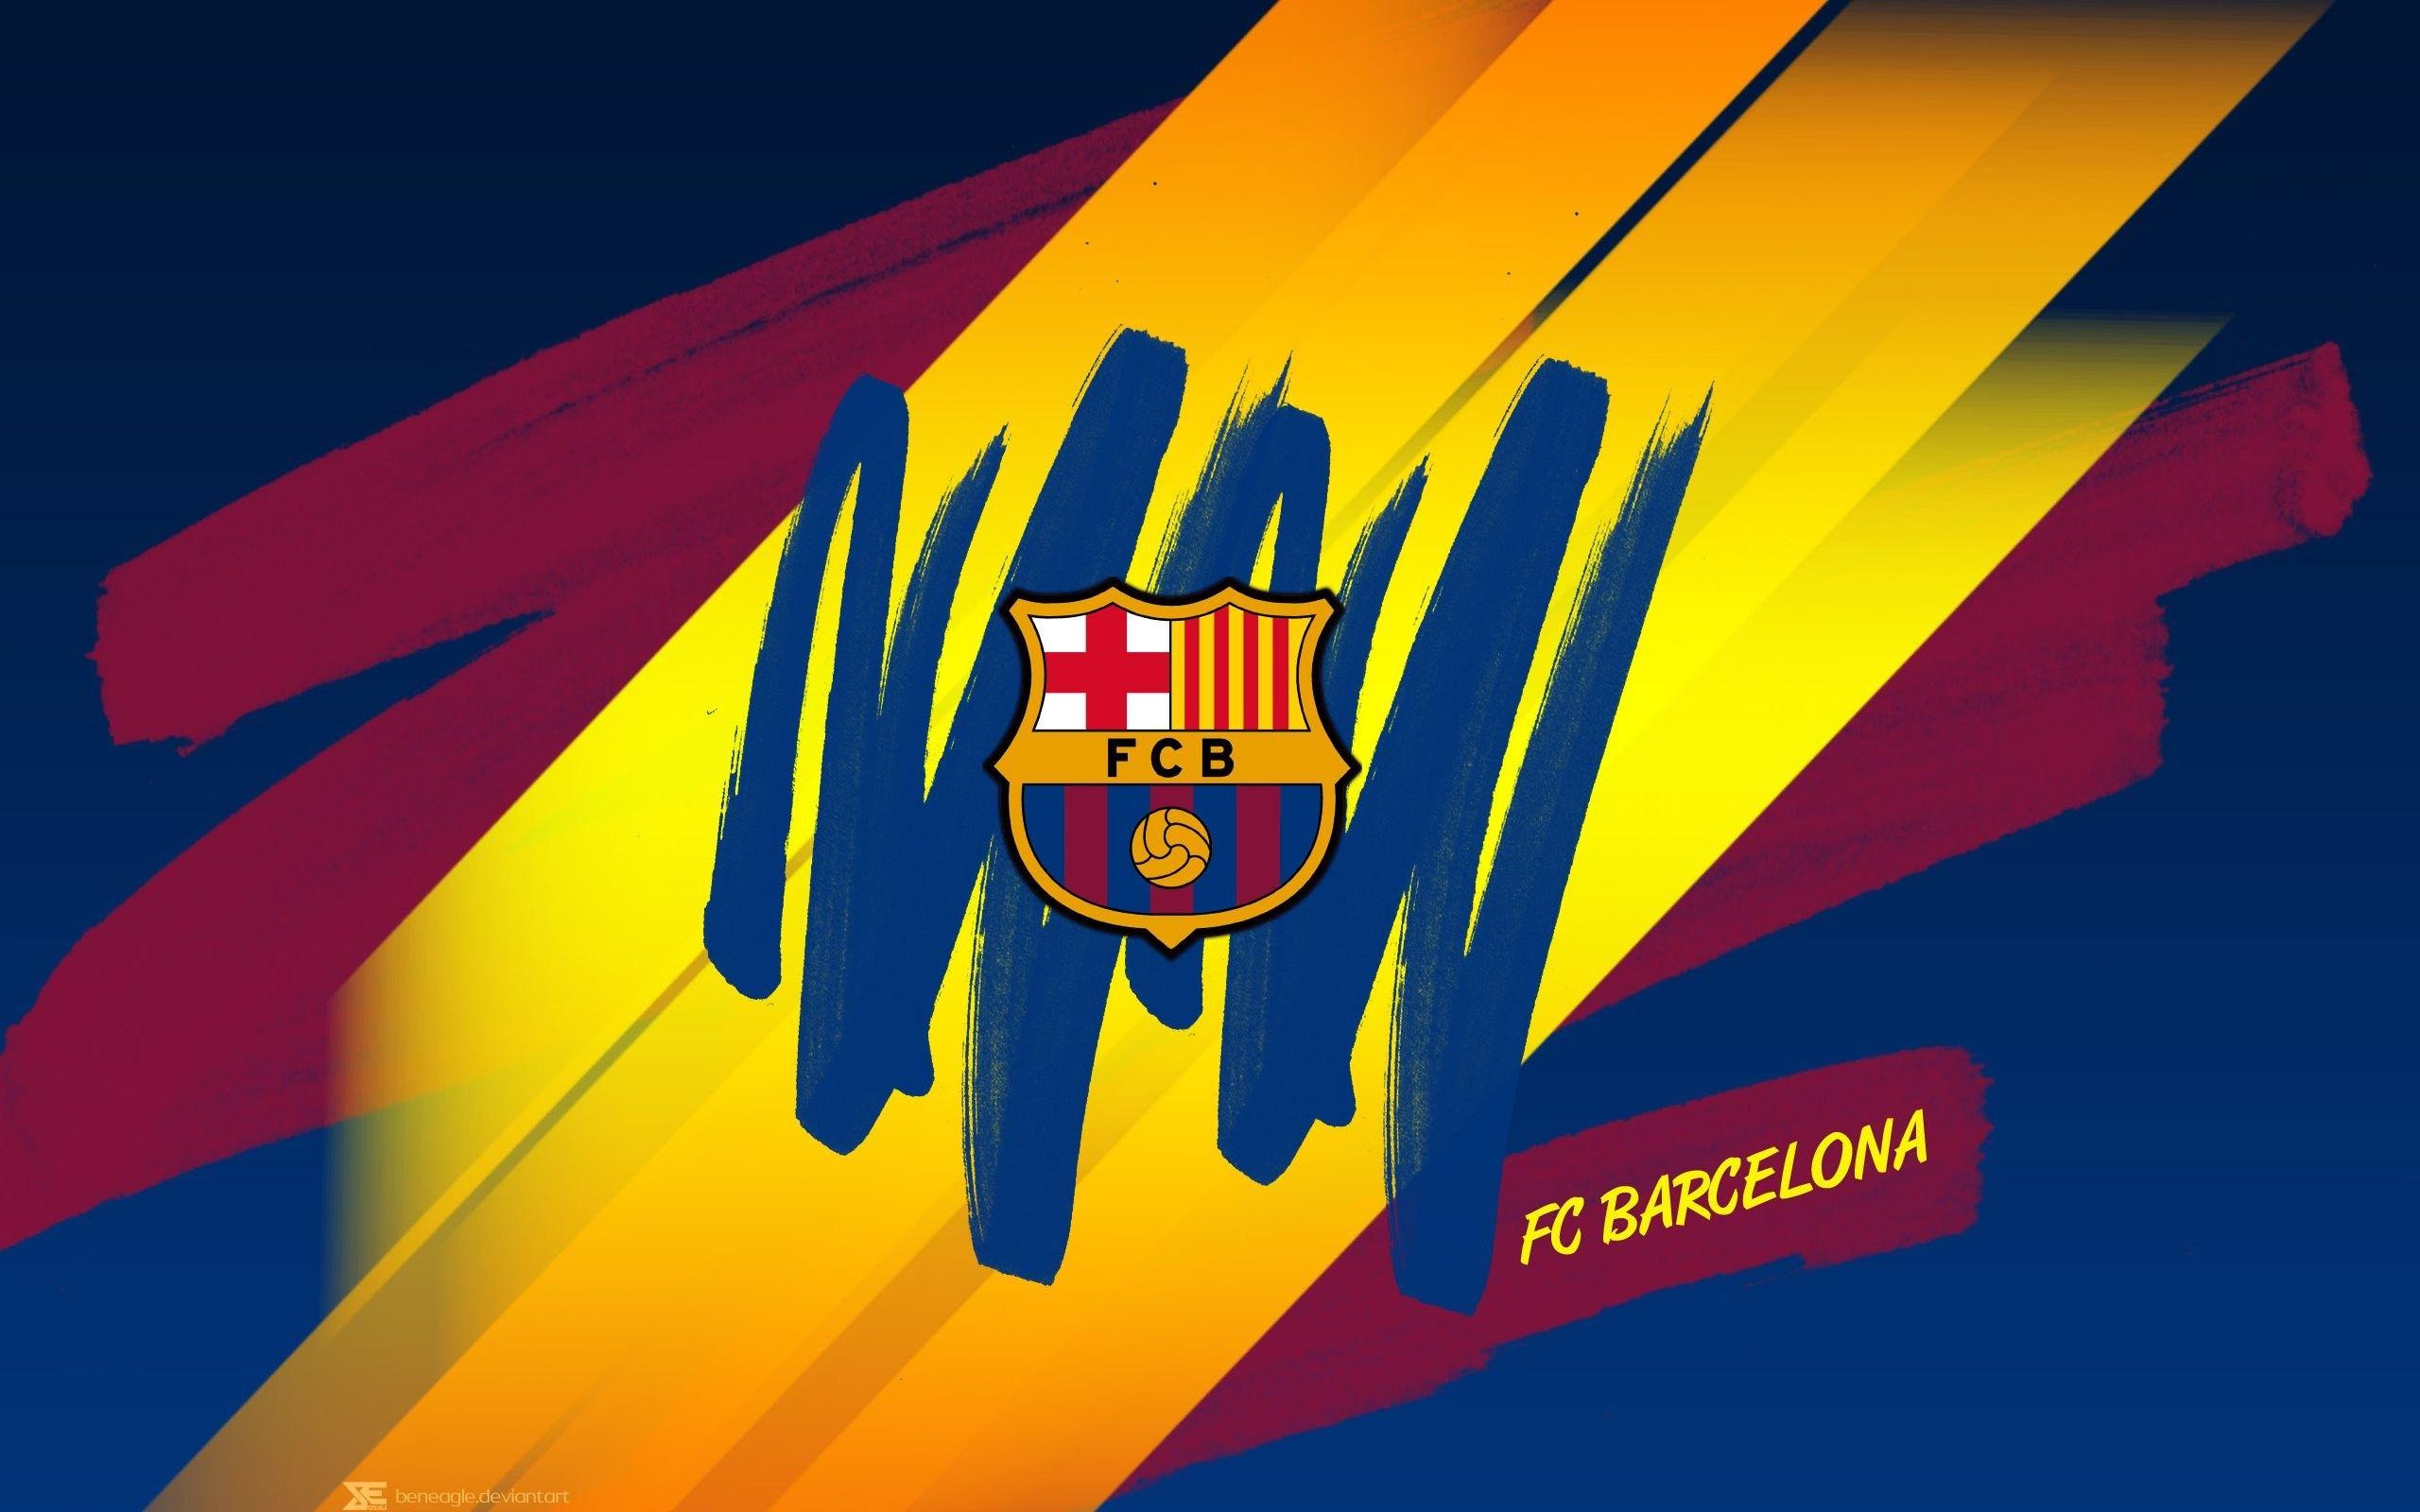 Amazing Fc Barcelona HD Wallpaper For iPhone 6 DHS9 Barcelona